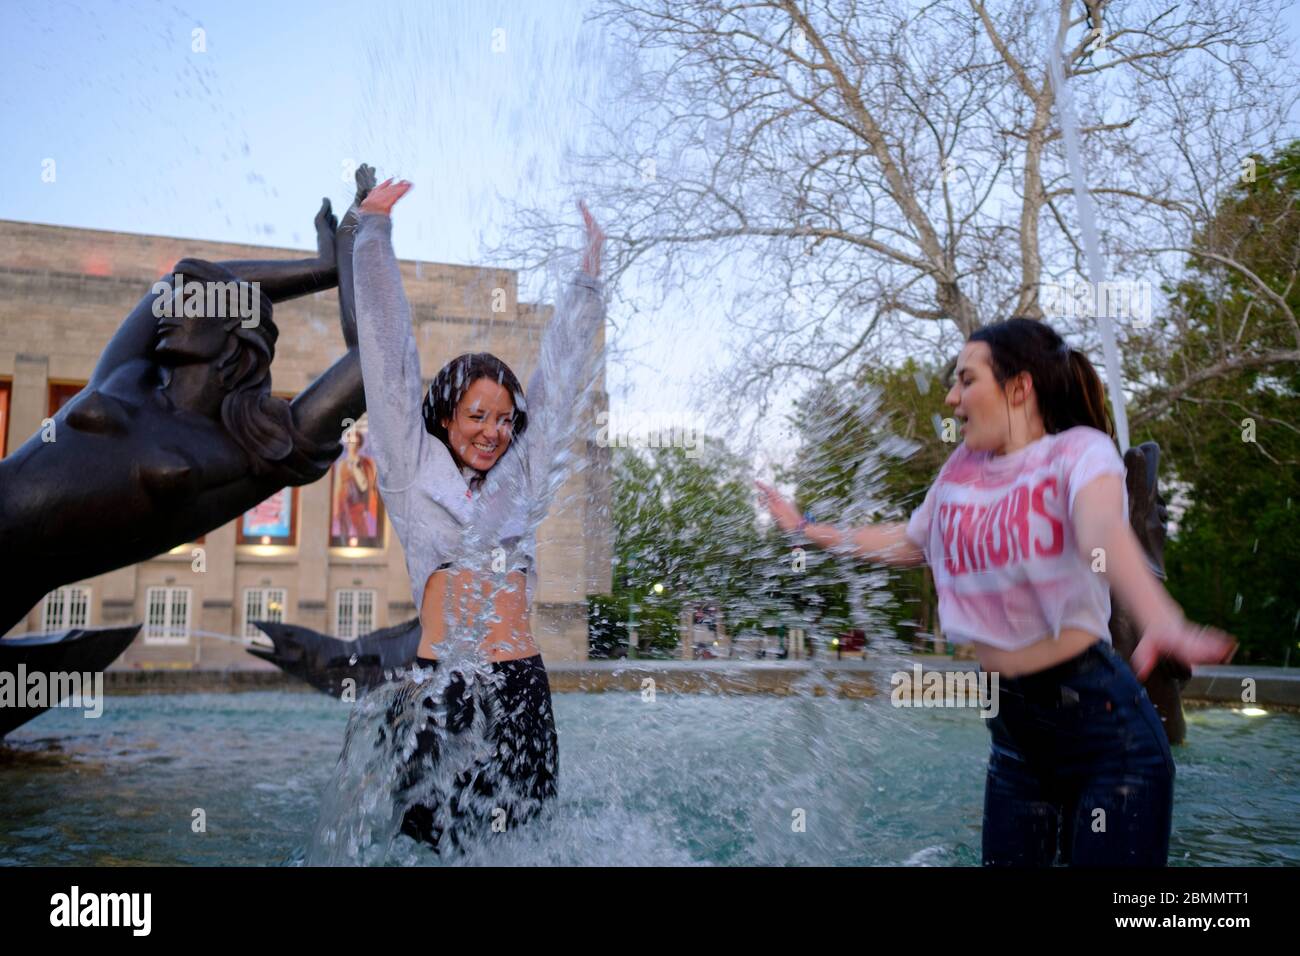 Bloomington, United States. 09th May, 2020. Two women splash water as a group of Indiana University students who just finished graduating from the Kelley School of business during a video ceremony this weekend celebrate afterwards by jumping into waters of the Show-alter Fountain and posing for photographs.Classes at IU were taught virtually since spring break due to the COVID-19/Coronavirus pandemic, and in person classes were cancelled and the in person annual graduation ceremony was also cancelled. Credit: SOPA Images Limited/Alamy Live News Stock Photo